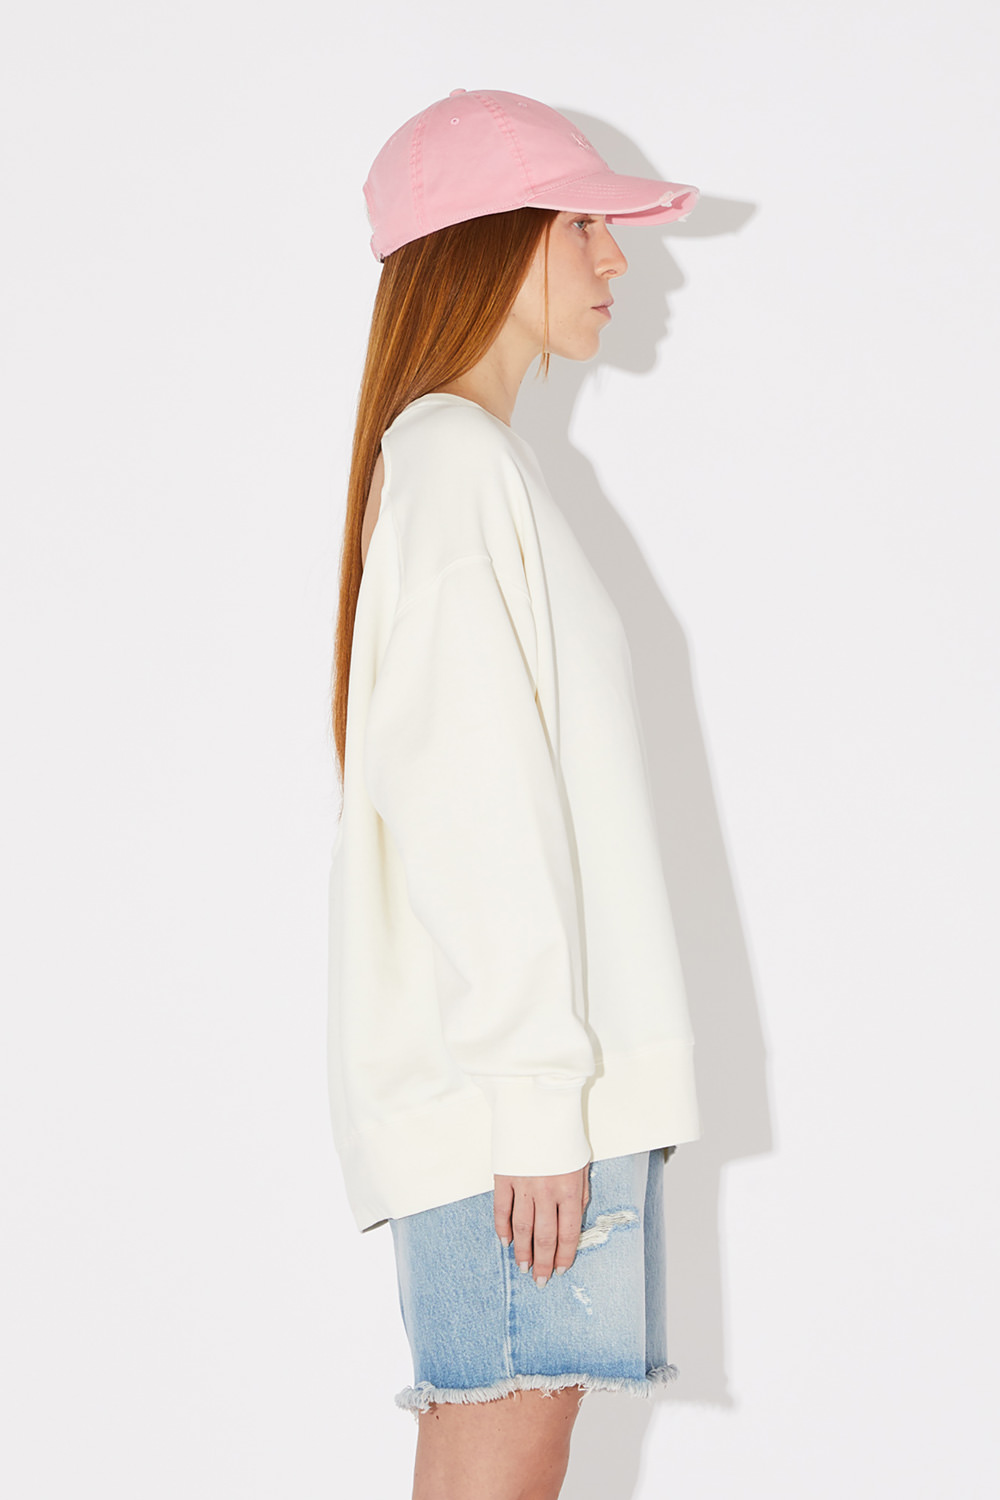 AMISH: CREW NECK SWEATSHIRT WITH CUT-OUT